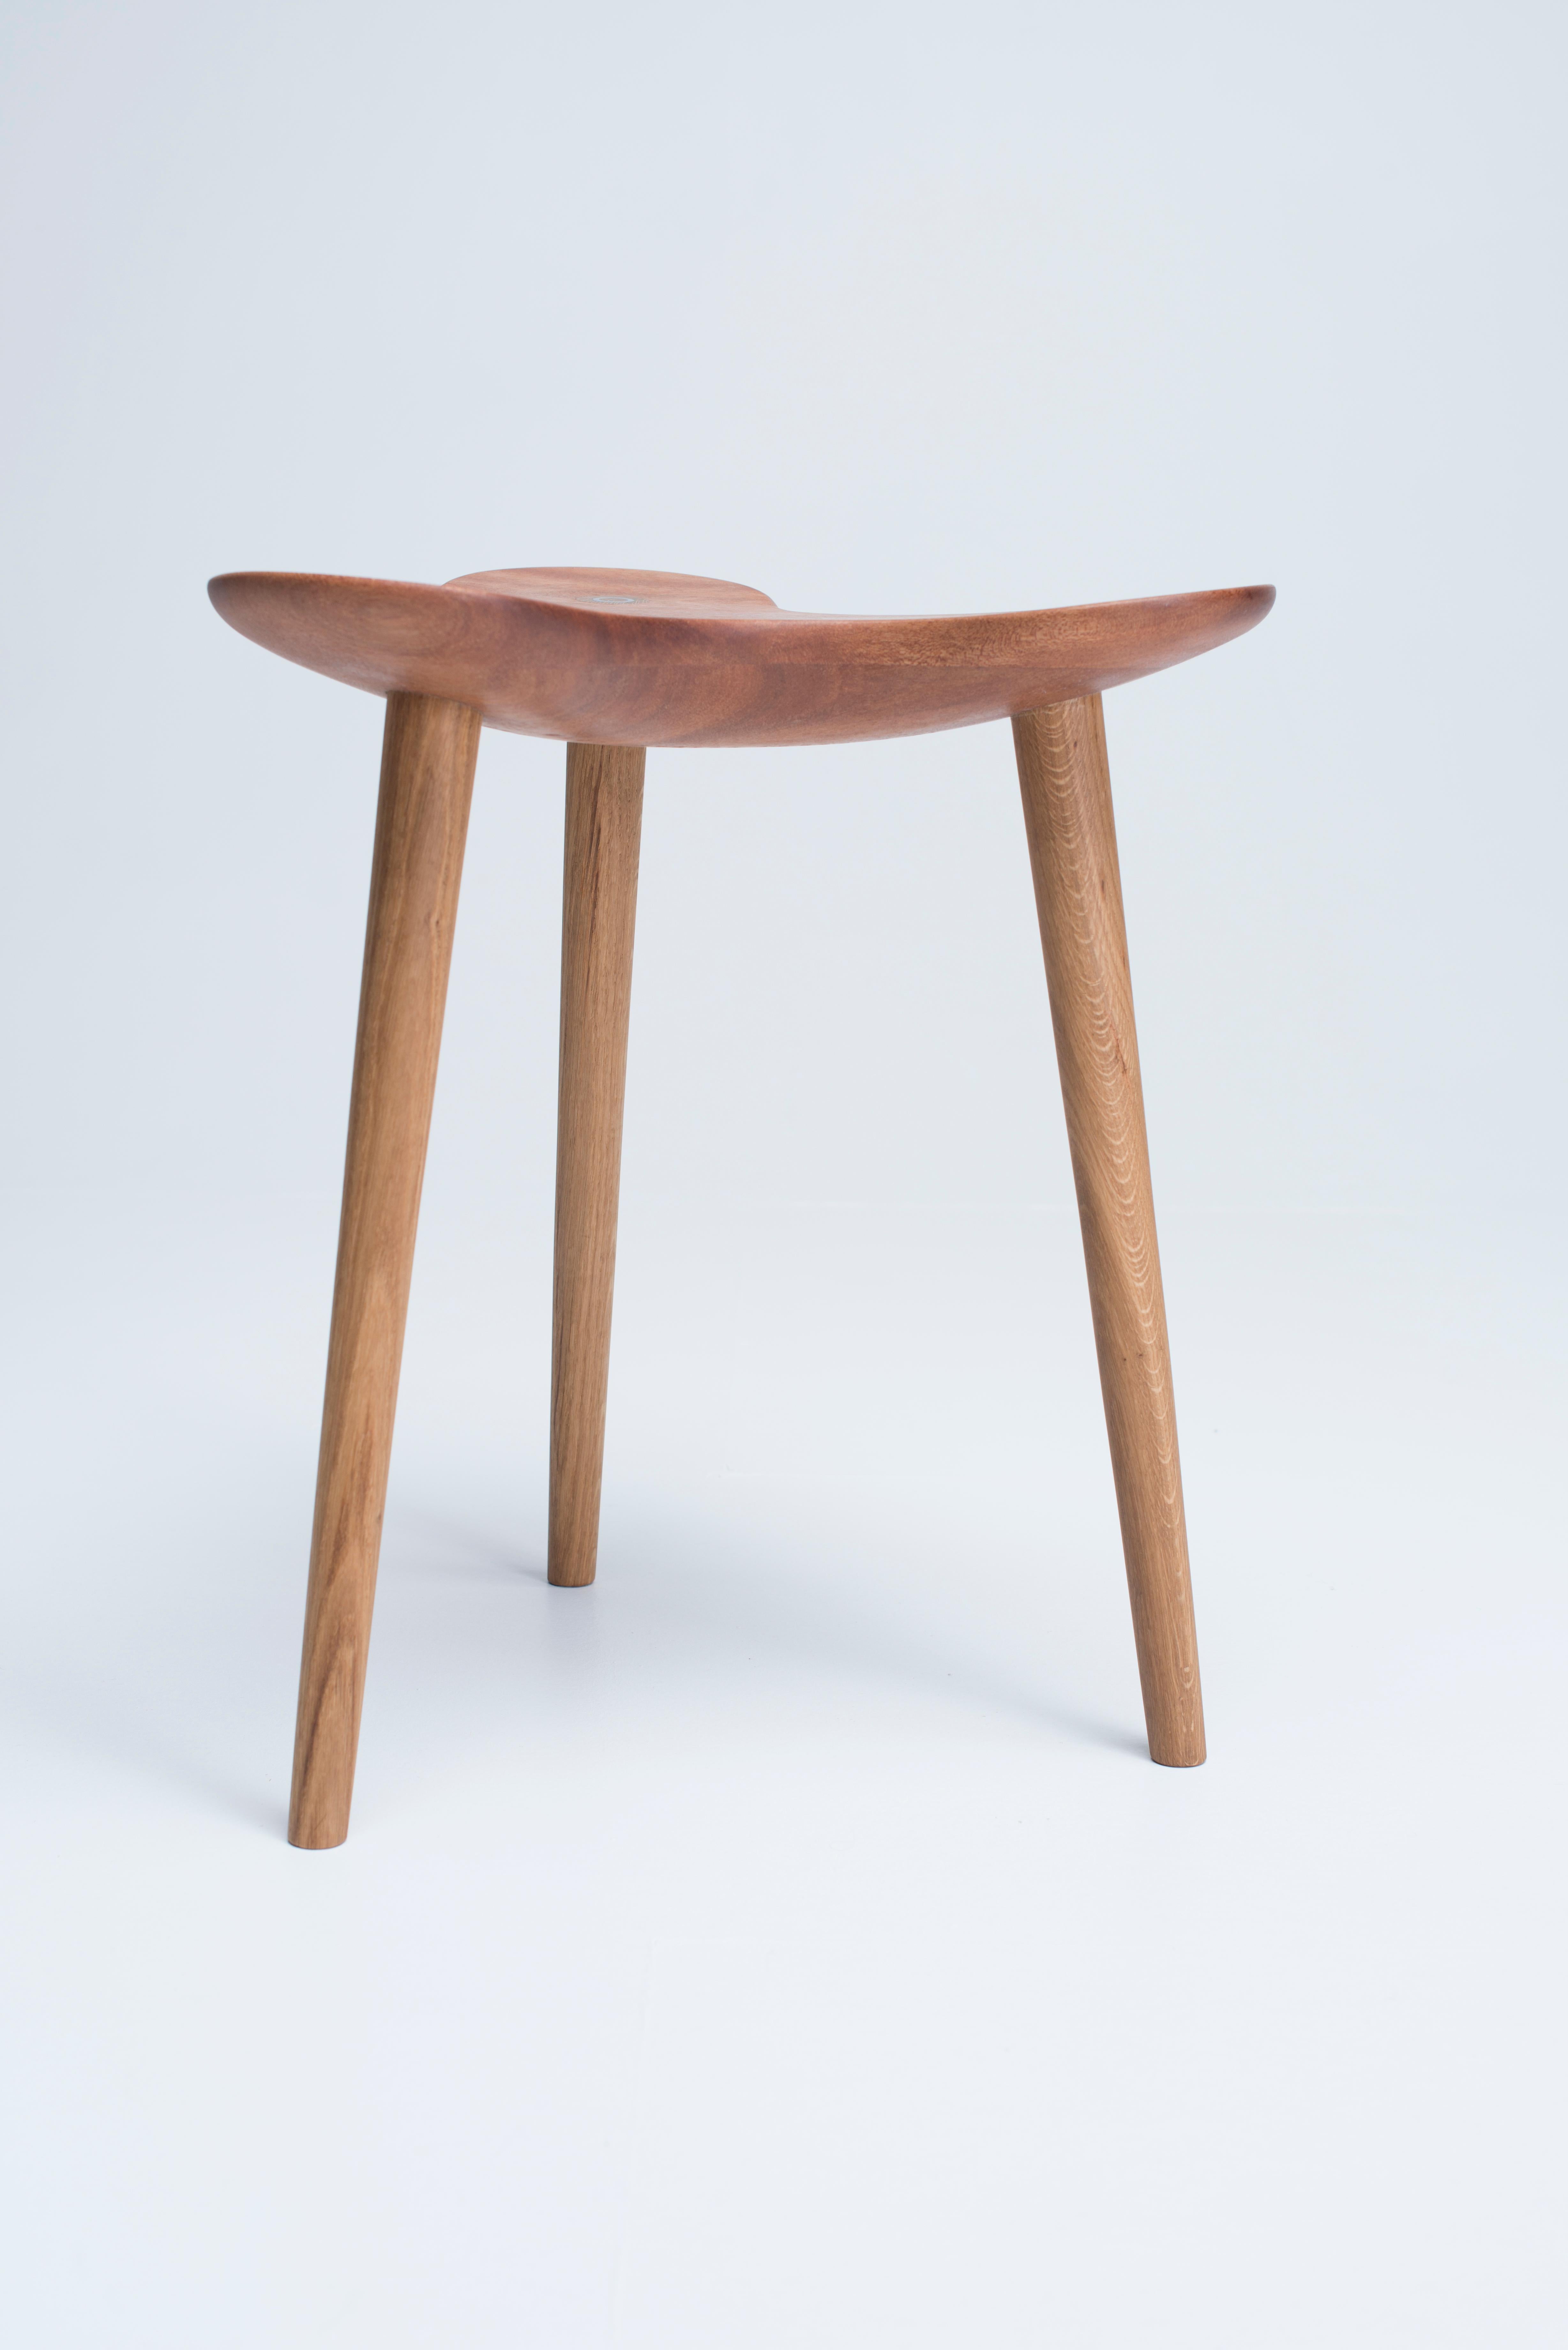 Omera is a stackable wooden stool designed by Philipp von Hase in collaboration with Timothee Boyat. The first series of thirty Omera stools was manufactured by the designers themselves in both France and Norway. The stools are now produced in small